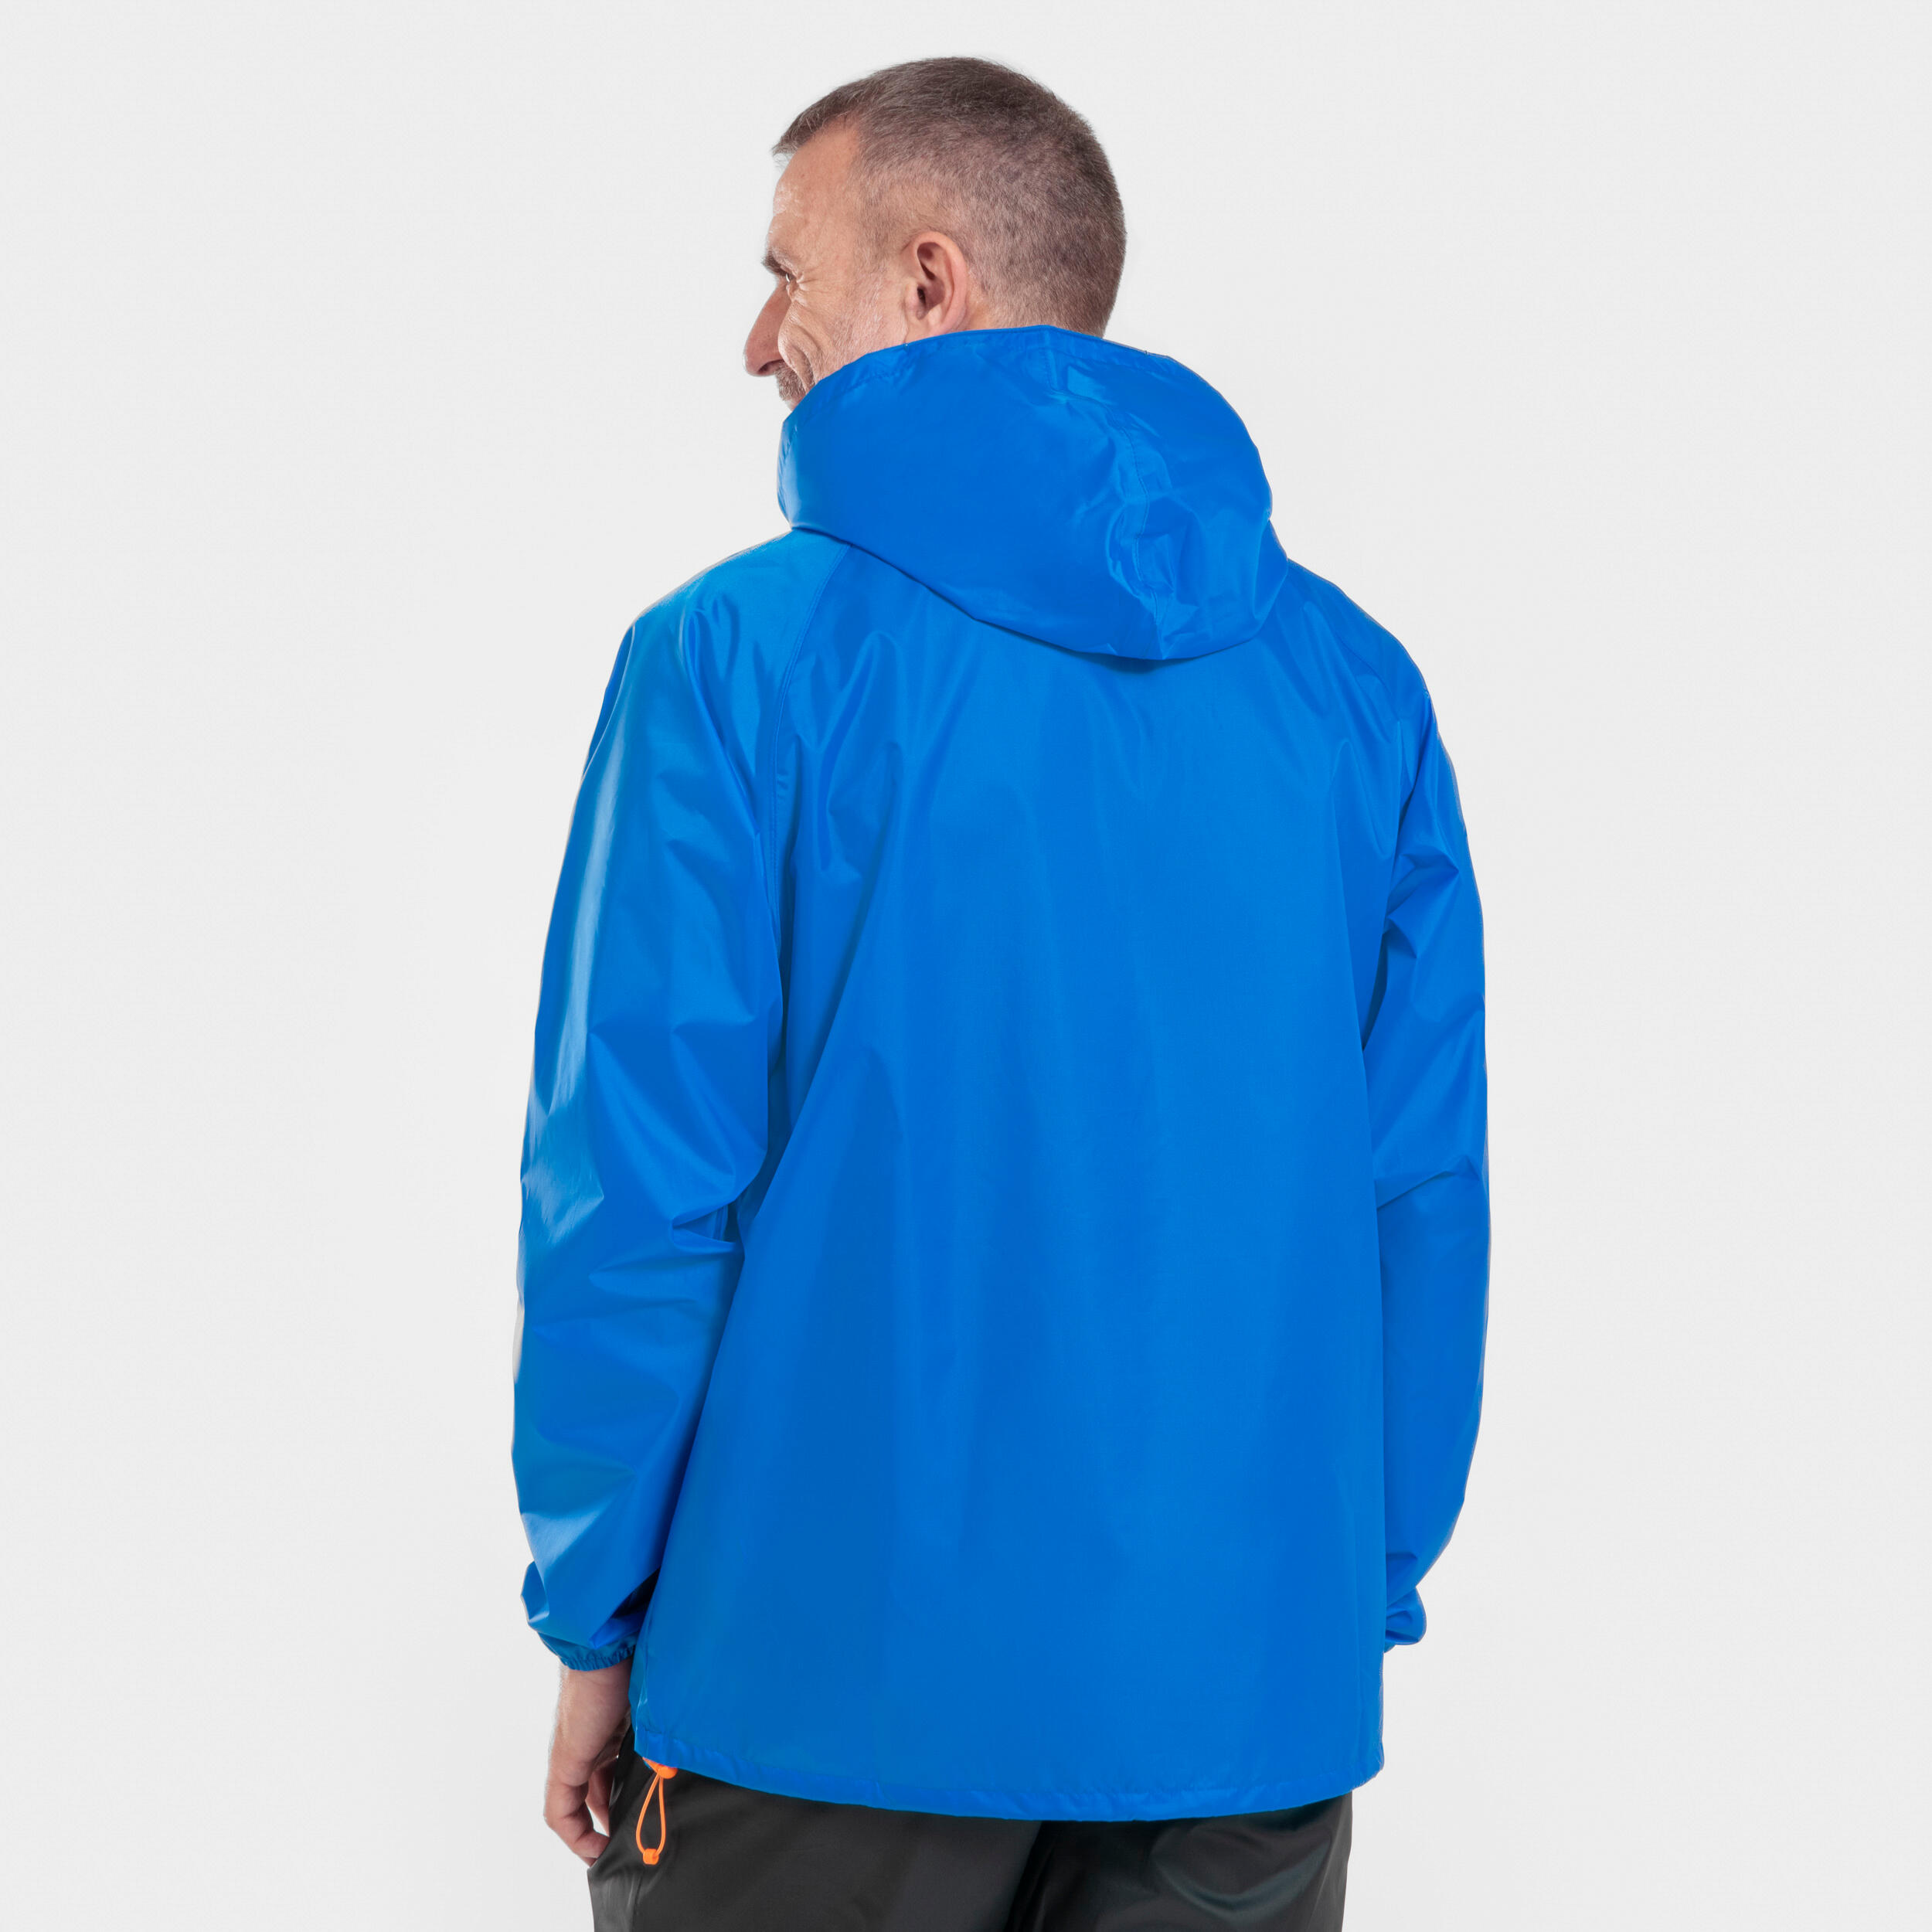 Men's Pullover Rain Jacket Waterproof Raincoat with Pocket : Amazon.ca:  Clothing, Shoes & Accessories